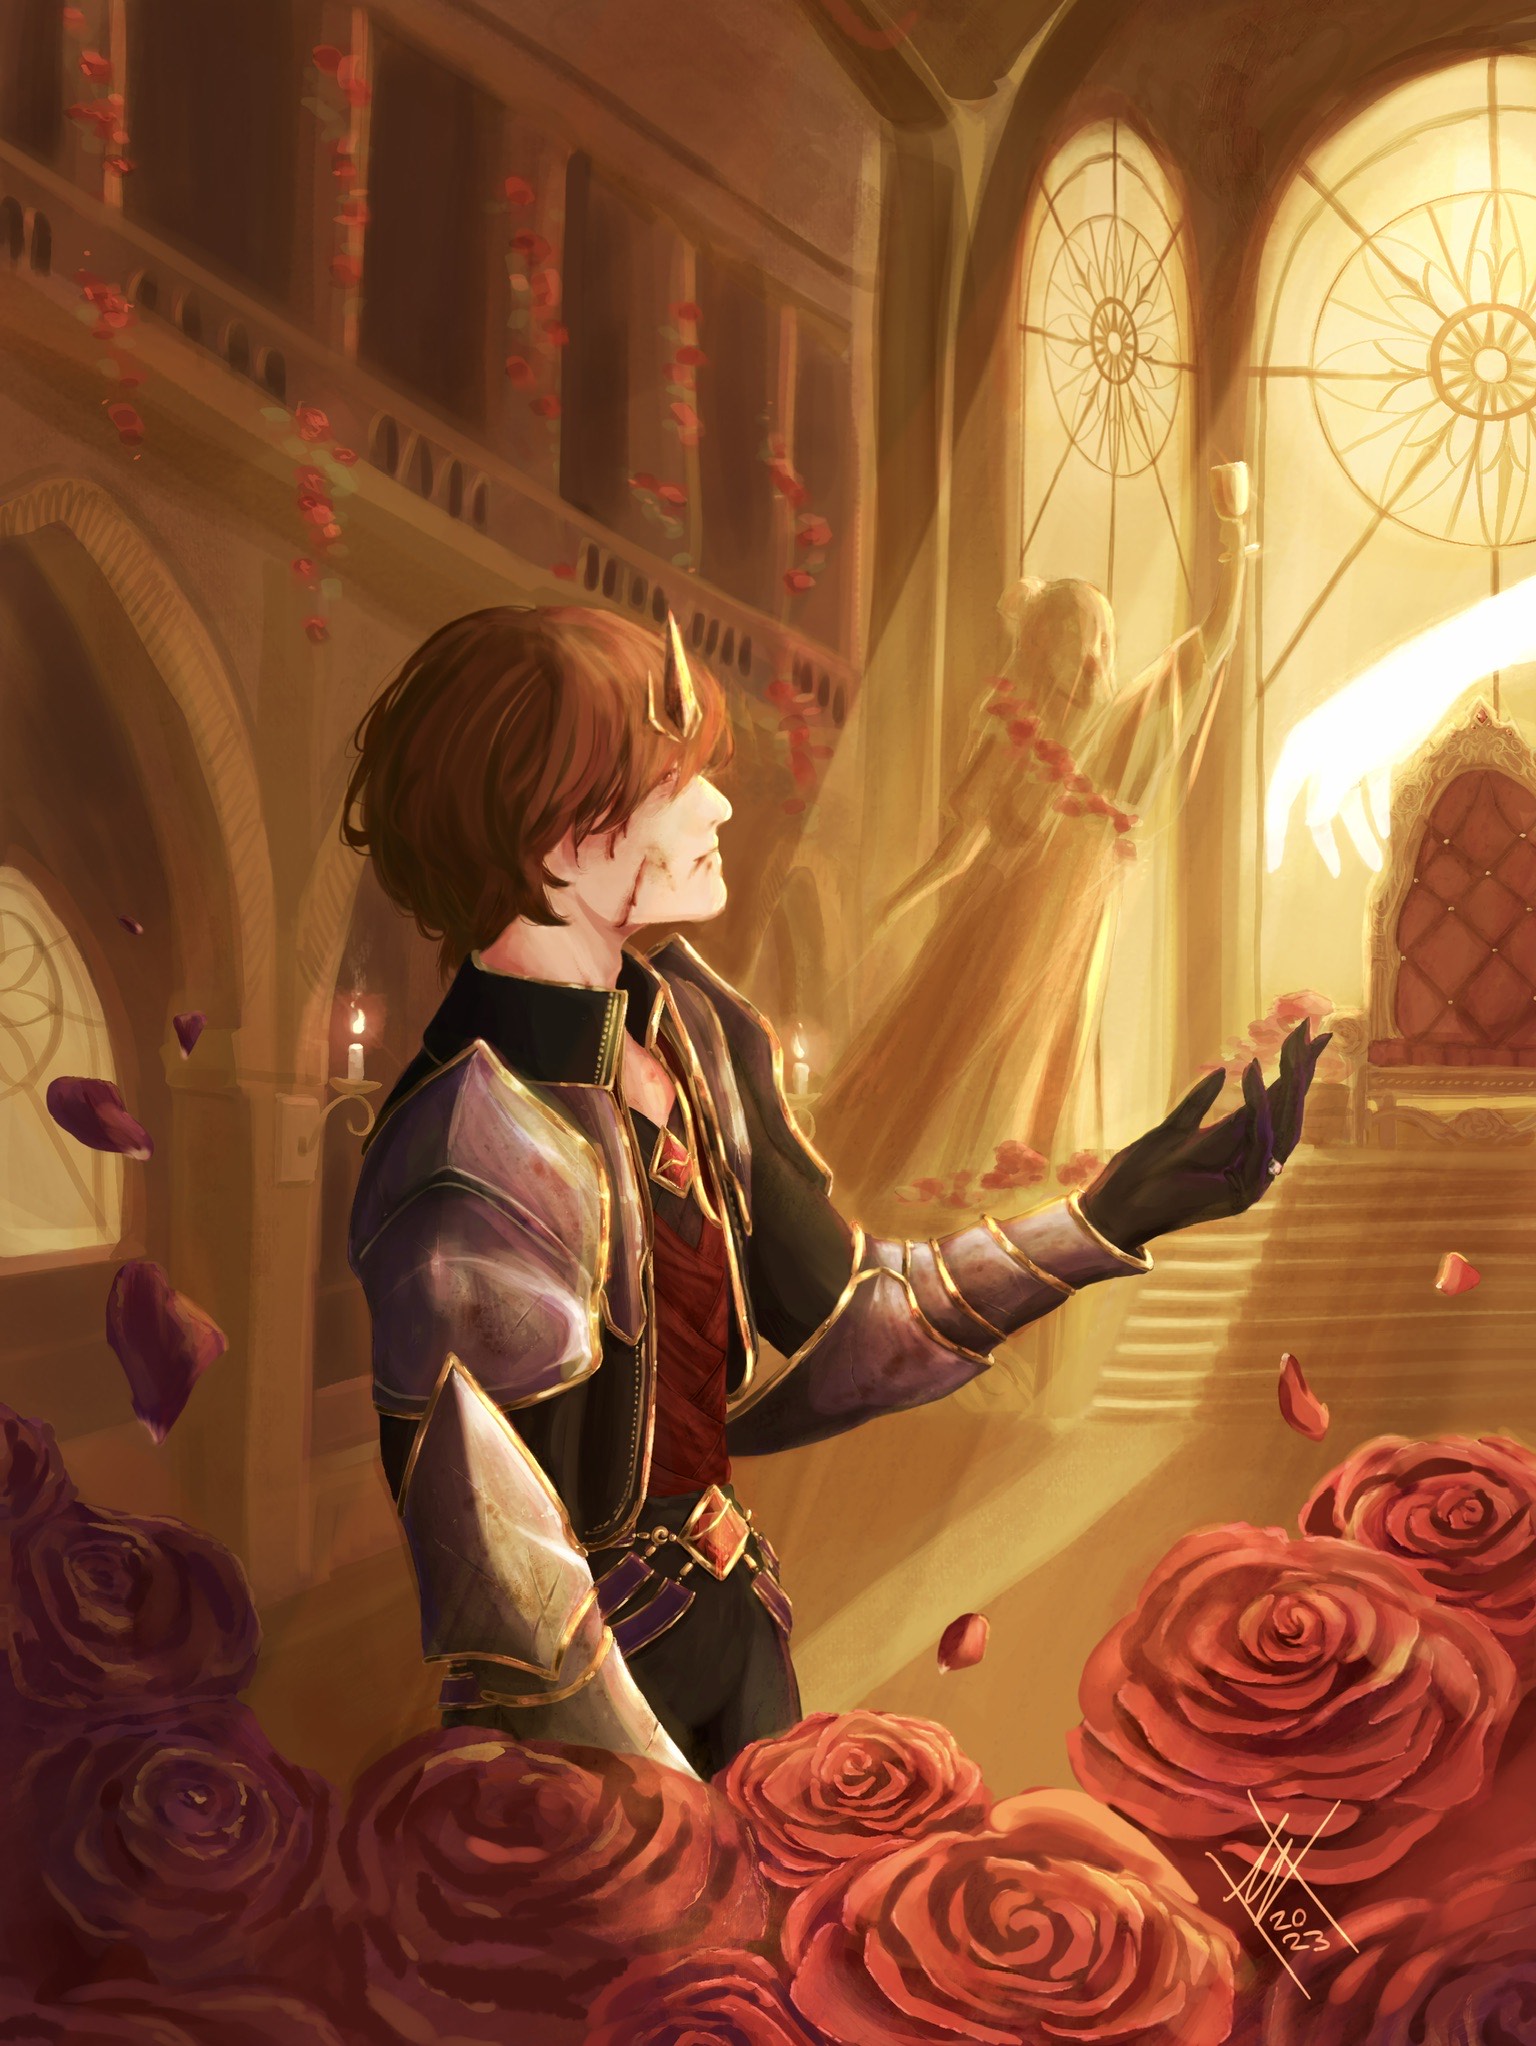 Digital art by Mica Viacrucis: a king wearing battered armor in a throne room, light streaming in and roses losing petals